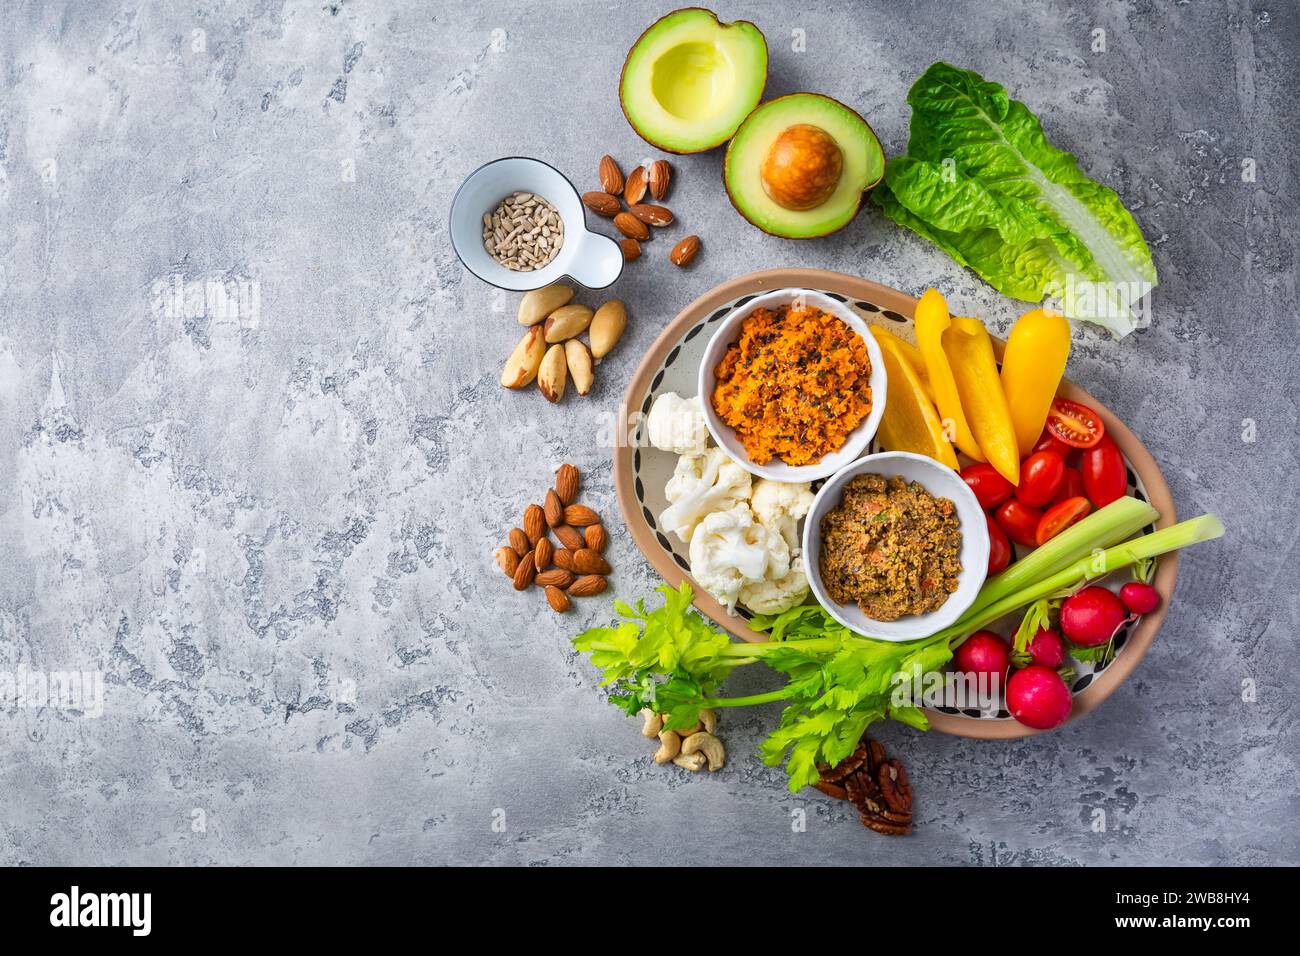 Assorted raw snack vegetables with dip sauce, healthy fresh food platter. Stock Photo